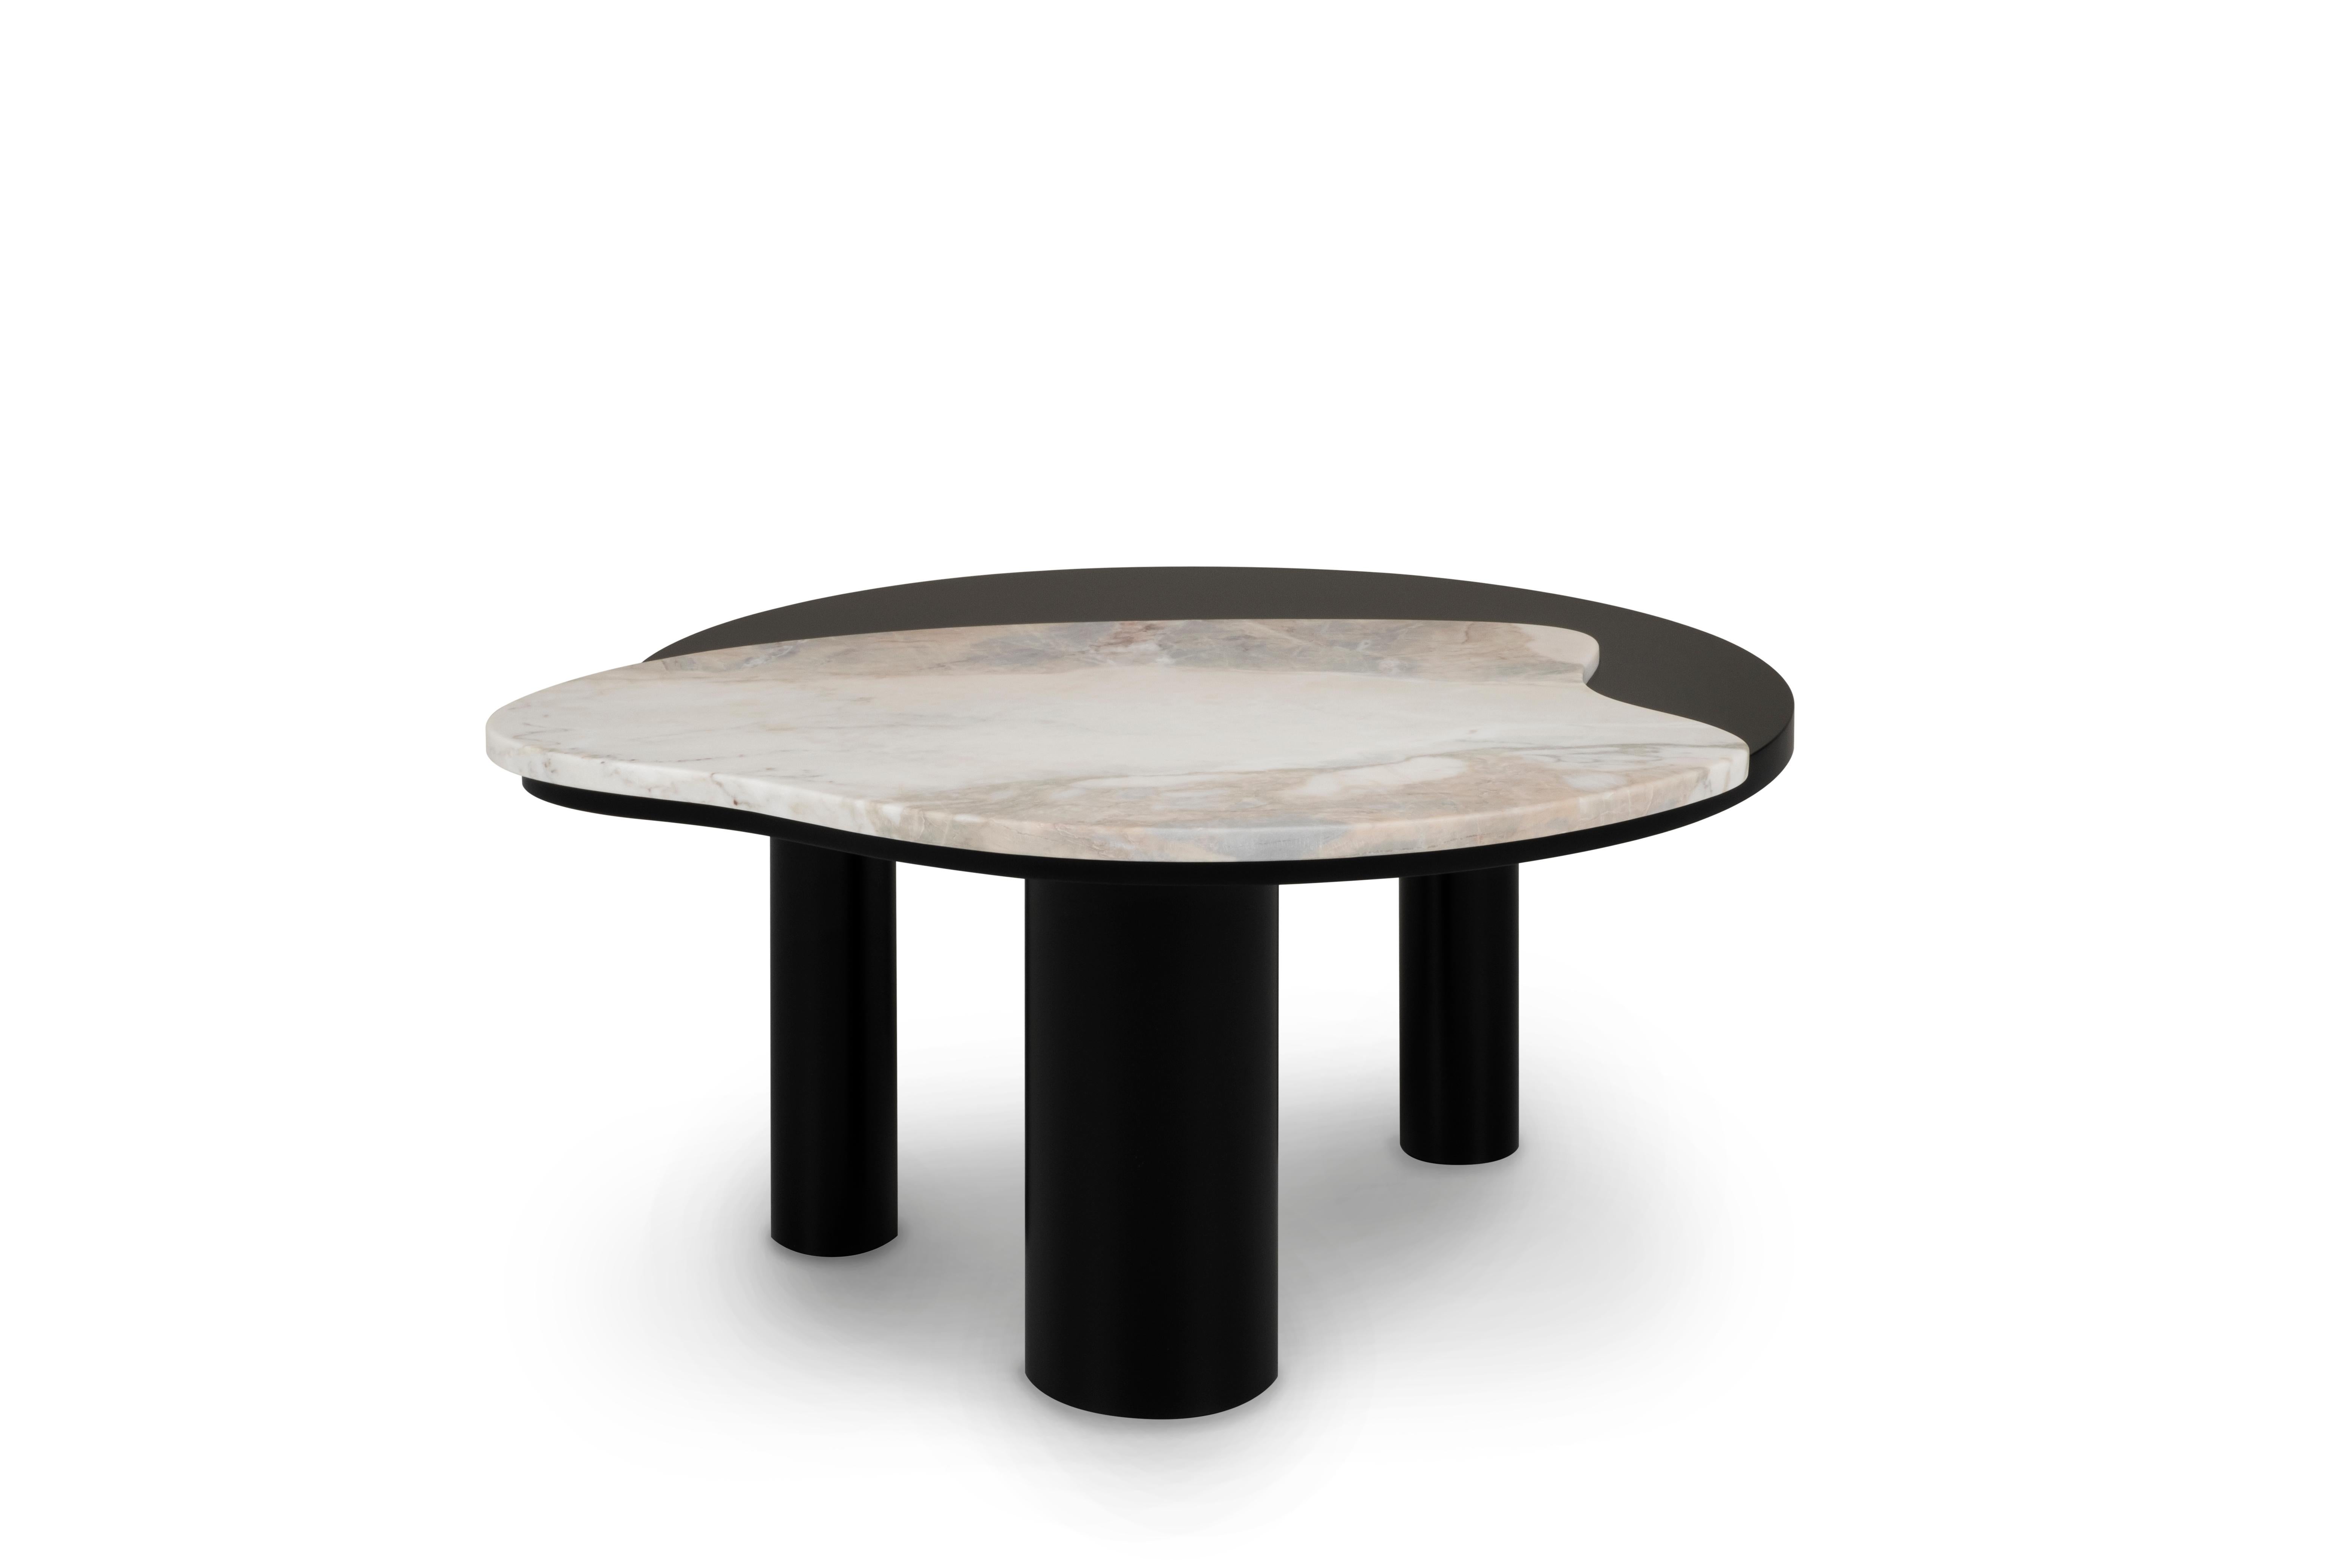 Bordeira coffee table, Contemporary Collection, Handcrafted in Portugal - Europe by Greenapple.

Designed by Rute Martins for the Contemporary Collection, the Bordeira modern coffee table was designed to add the essence of nature into the interior